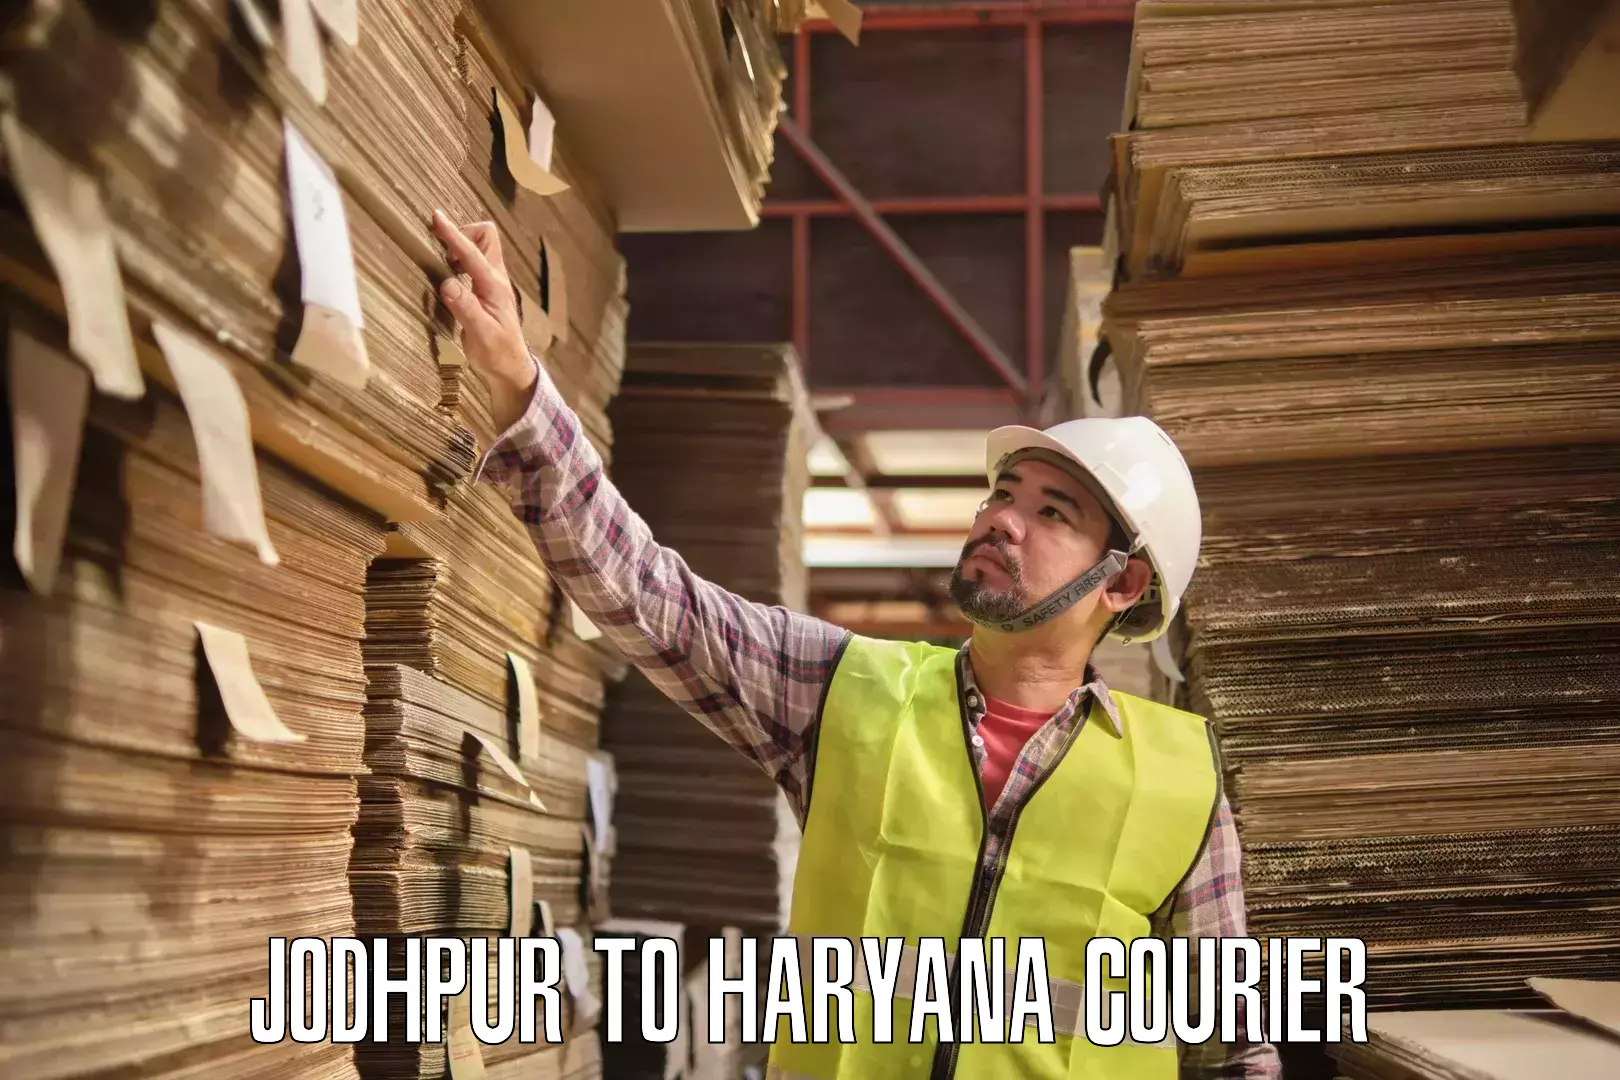 Easy access courier services Jodhpur to Haryana